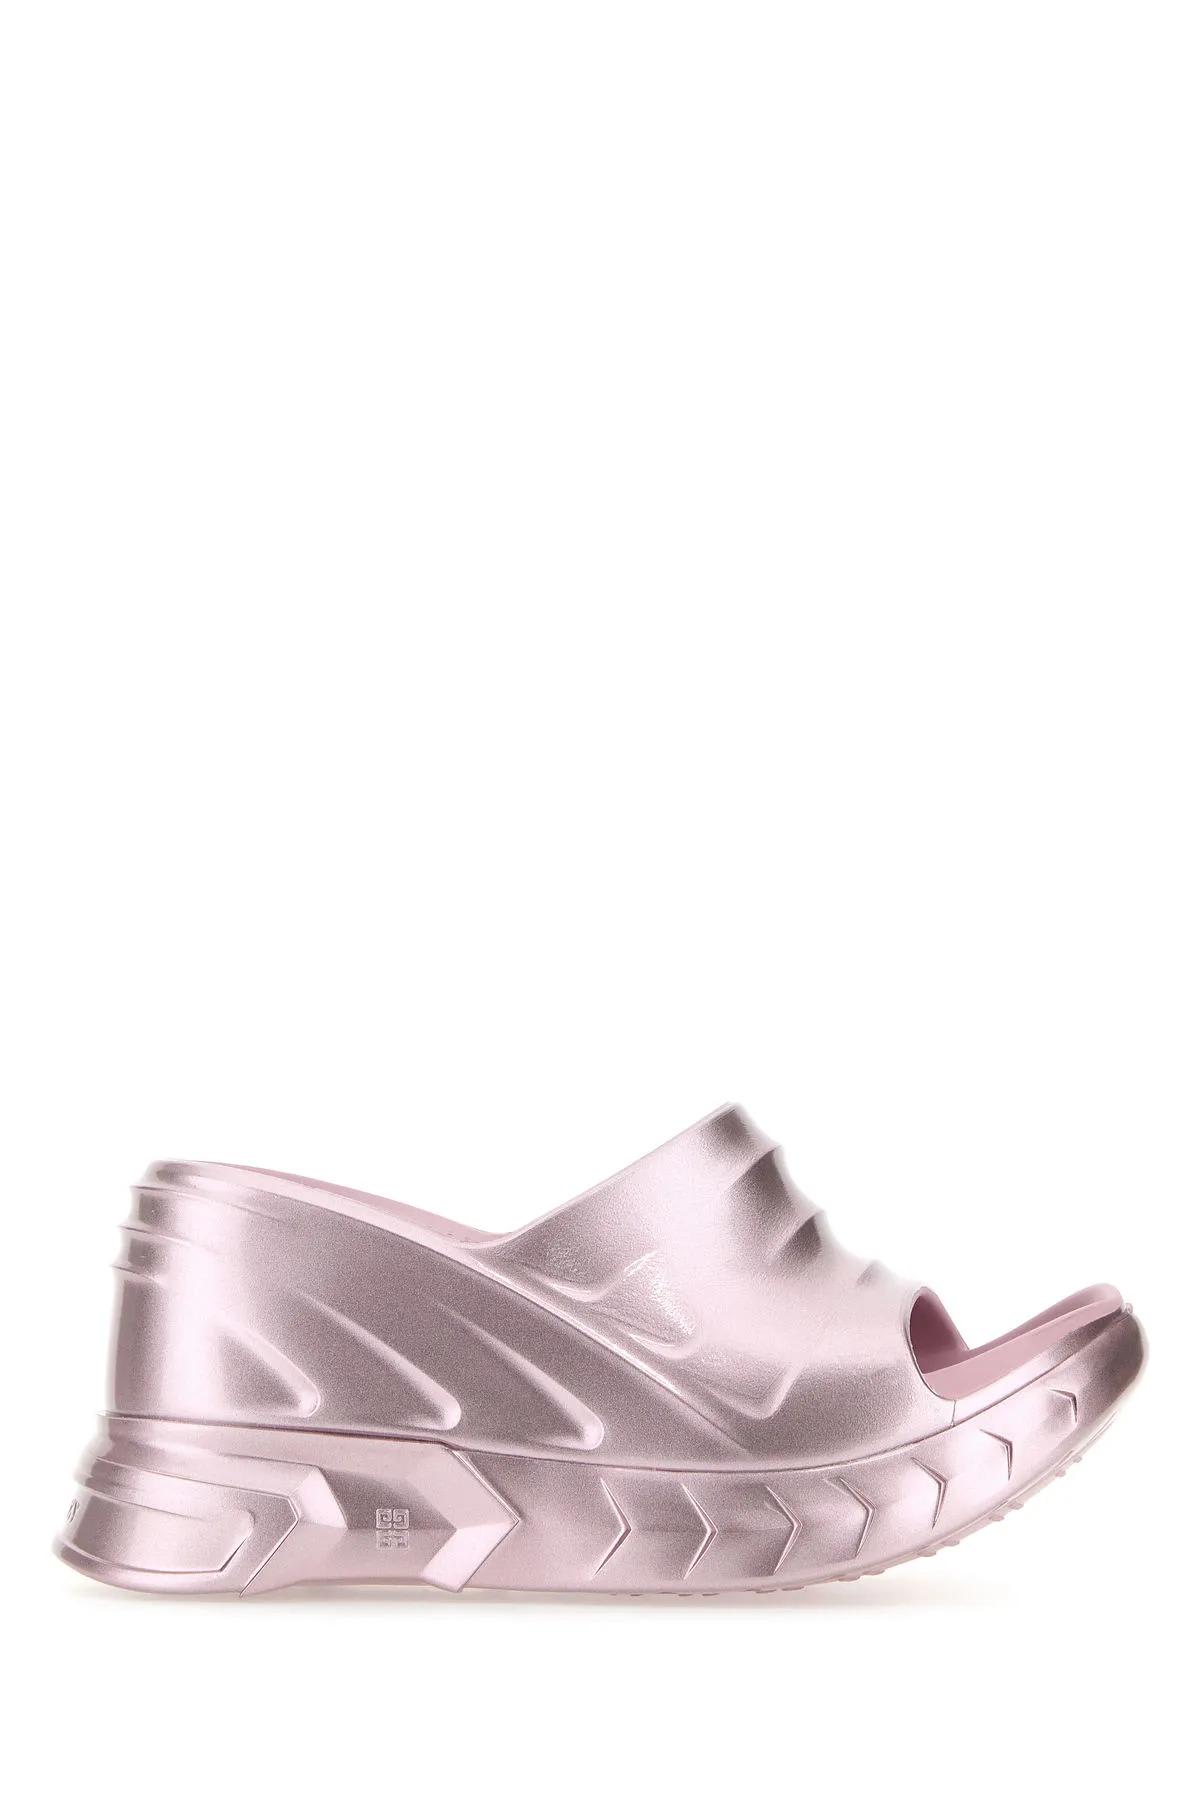 GIVENCHY PINK RUBBER MARSHMALLOW MULES